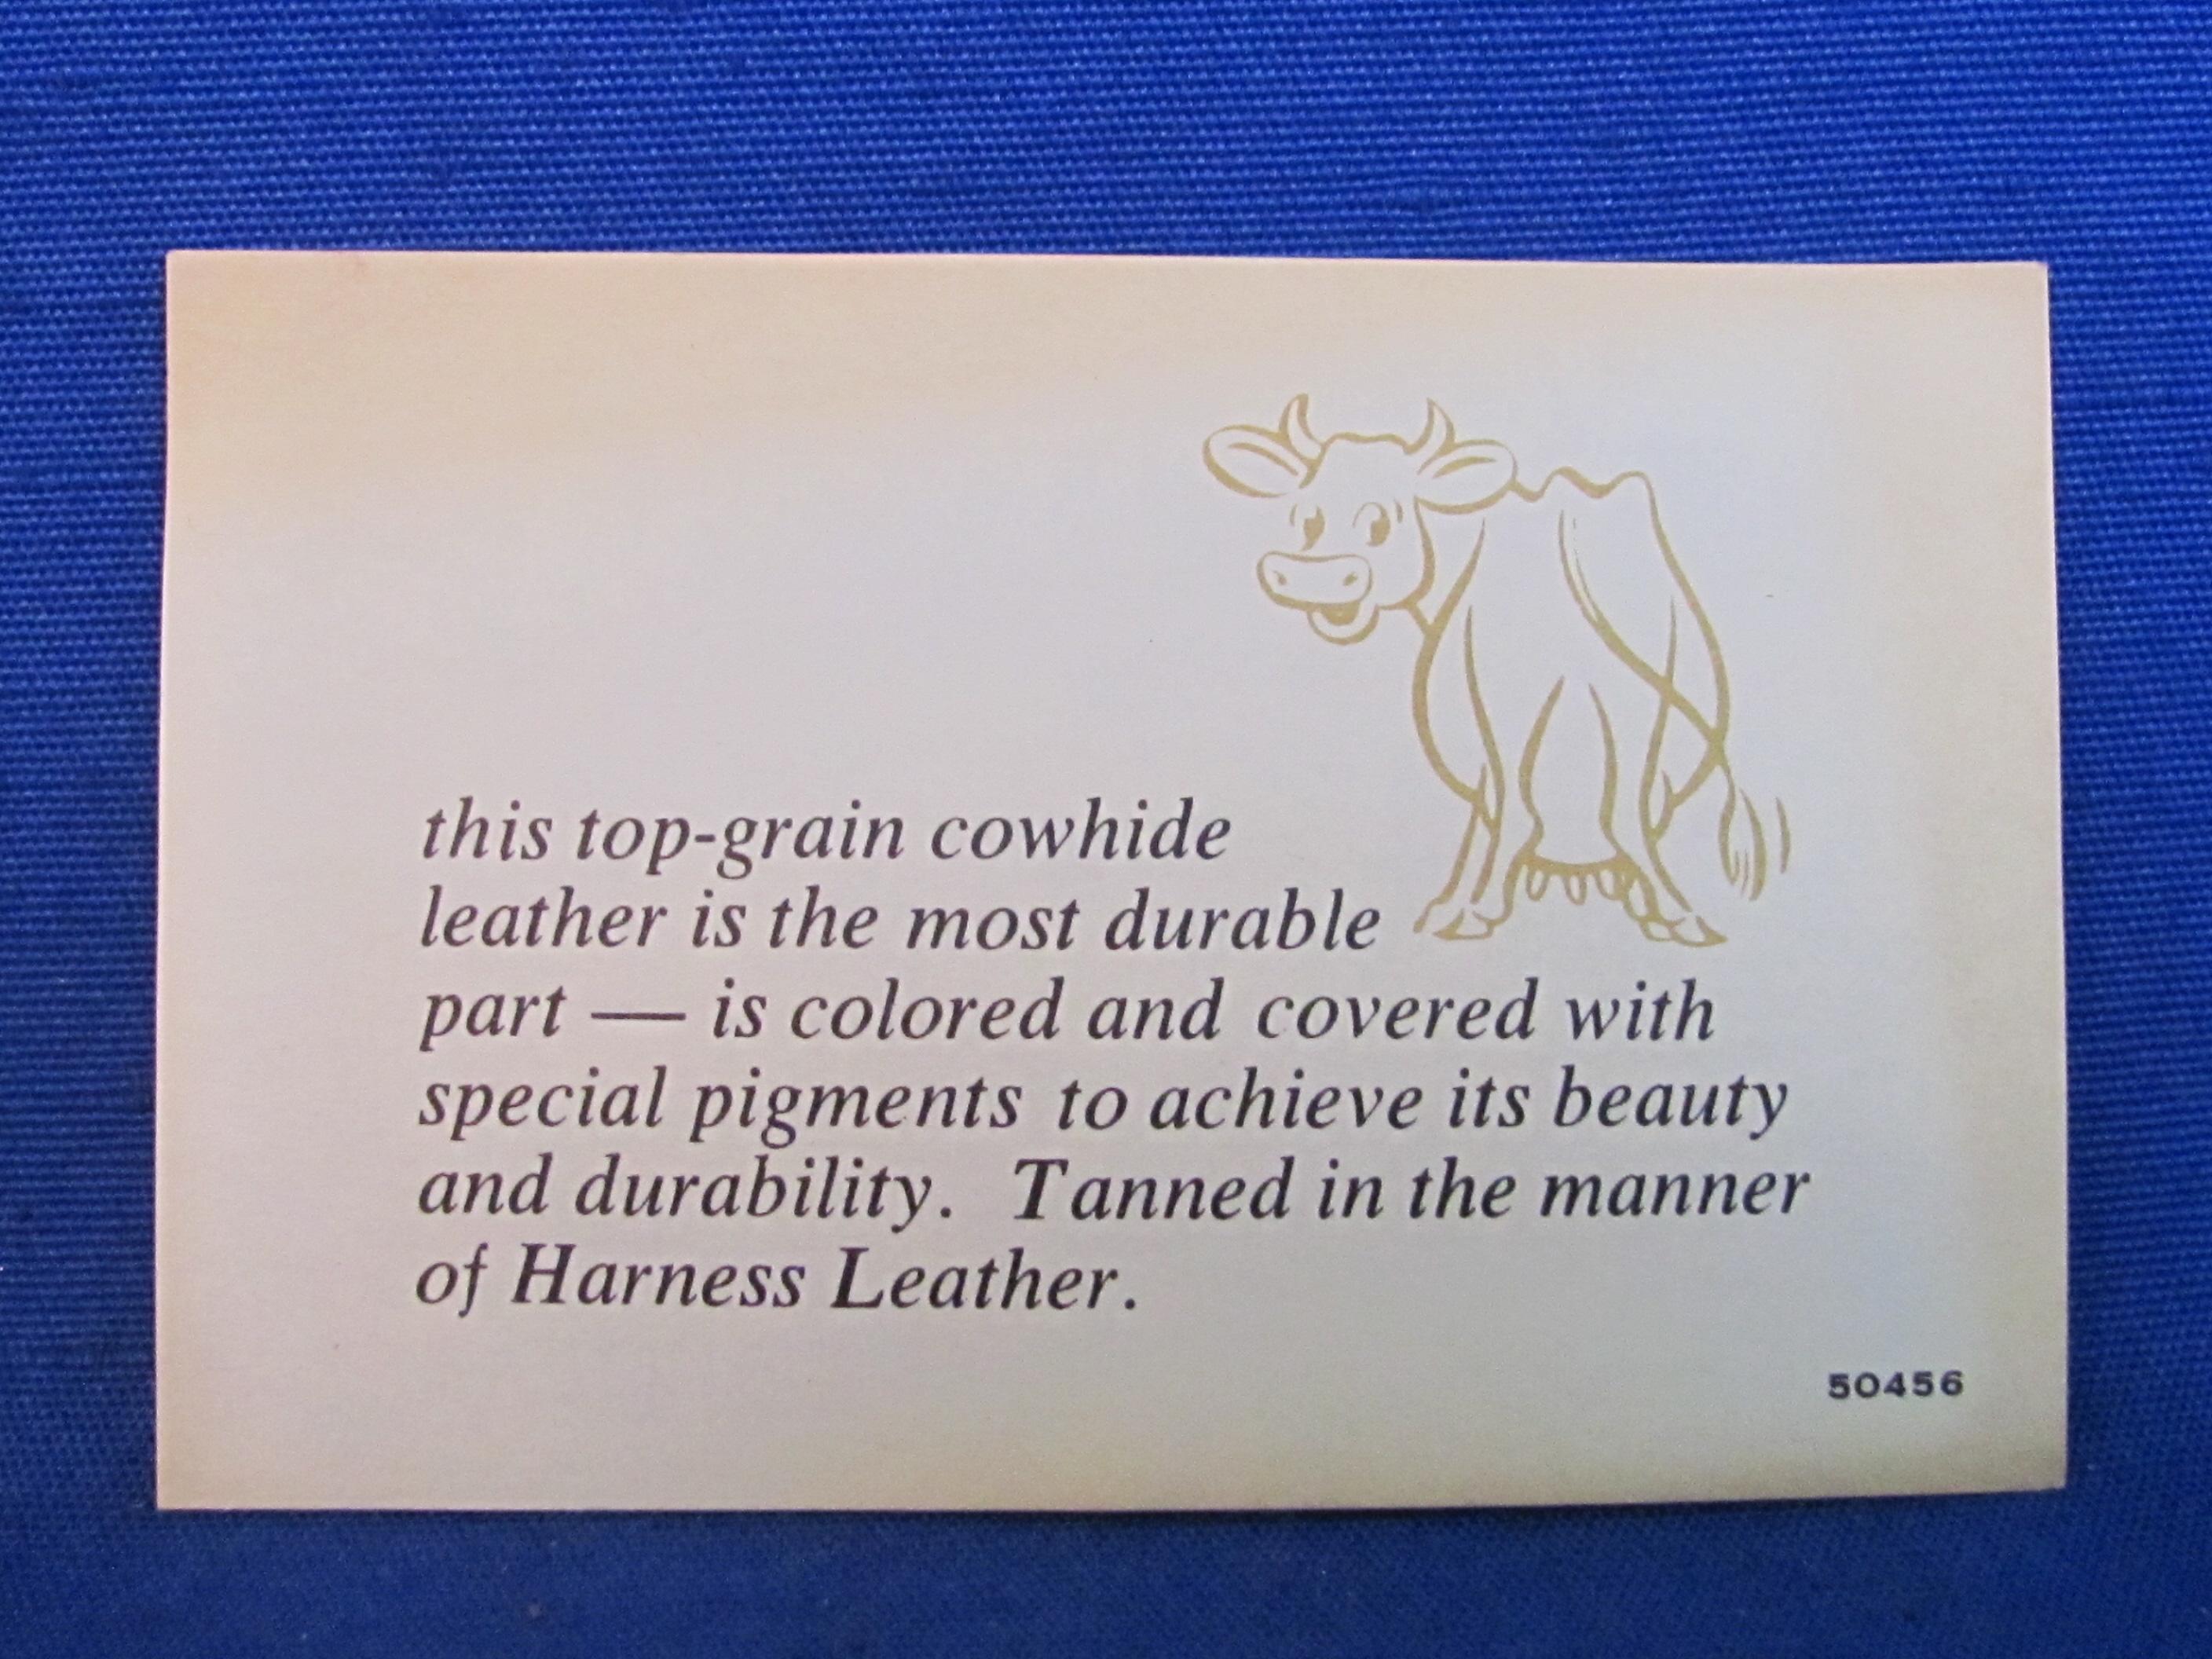 Lord Buxton Convertible Wallet – Top-Grain Cowhide Leather – In Box – New Old Stock